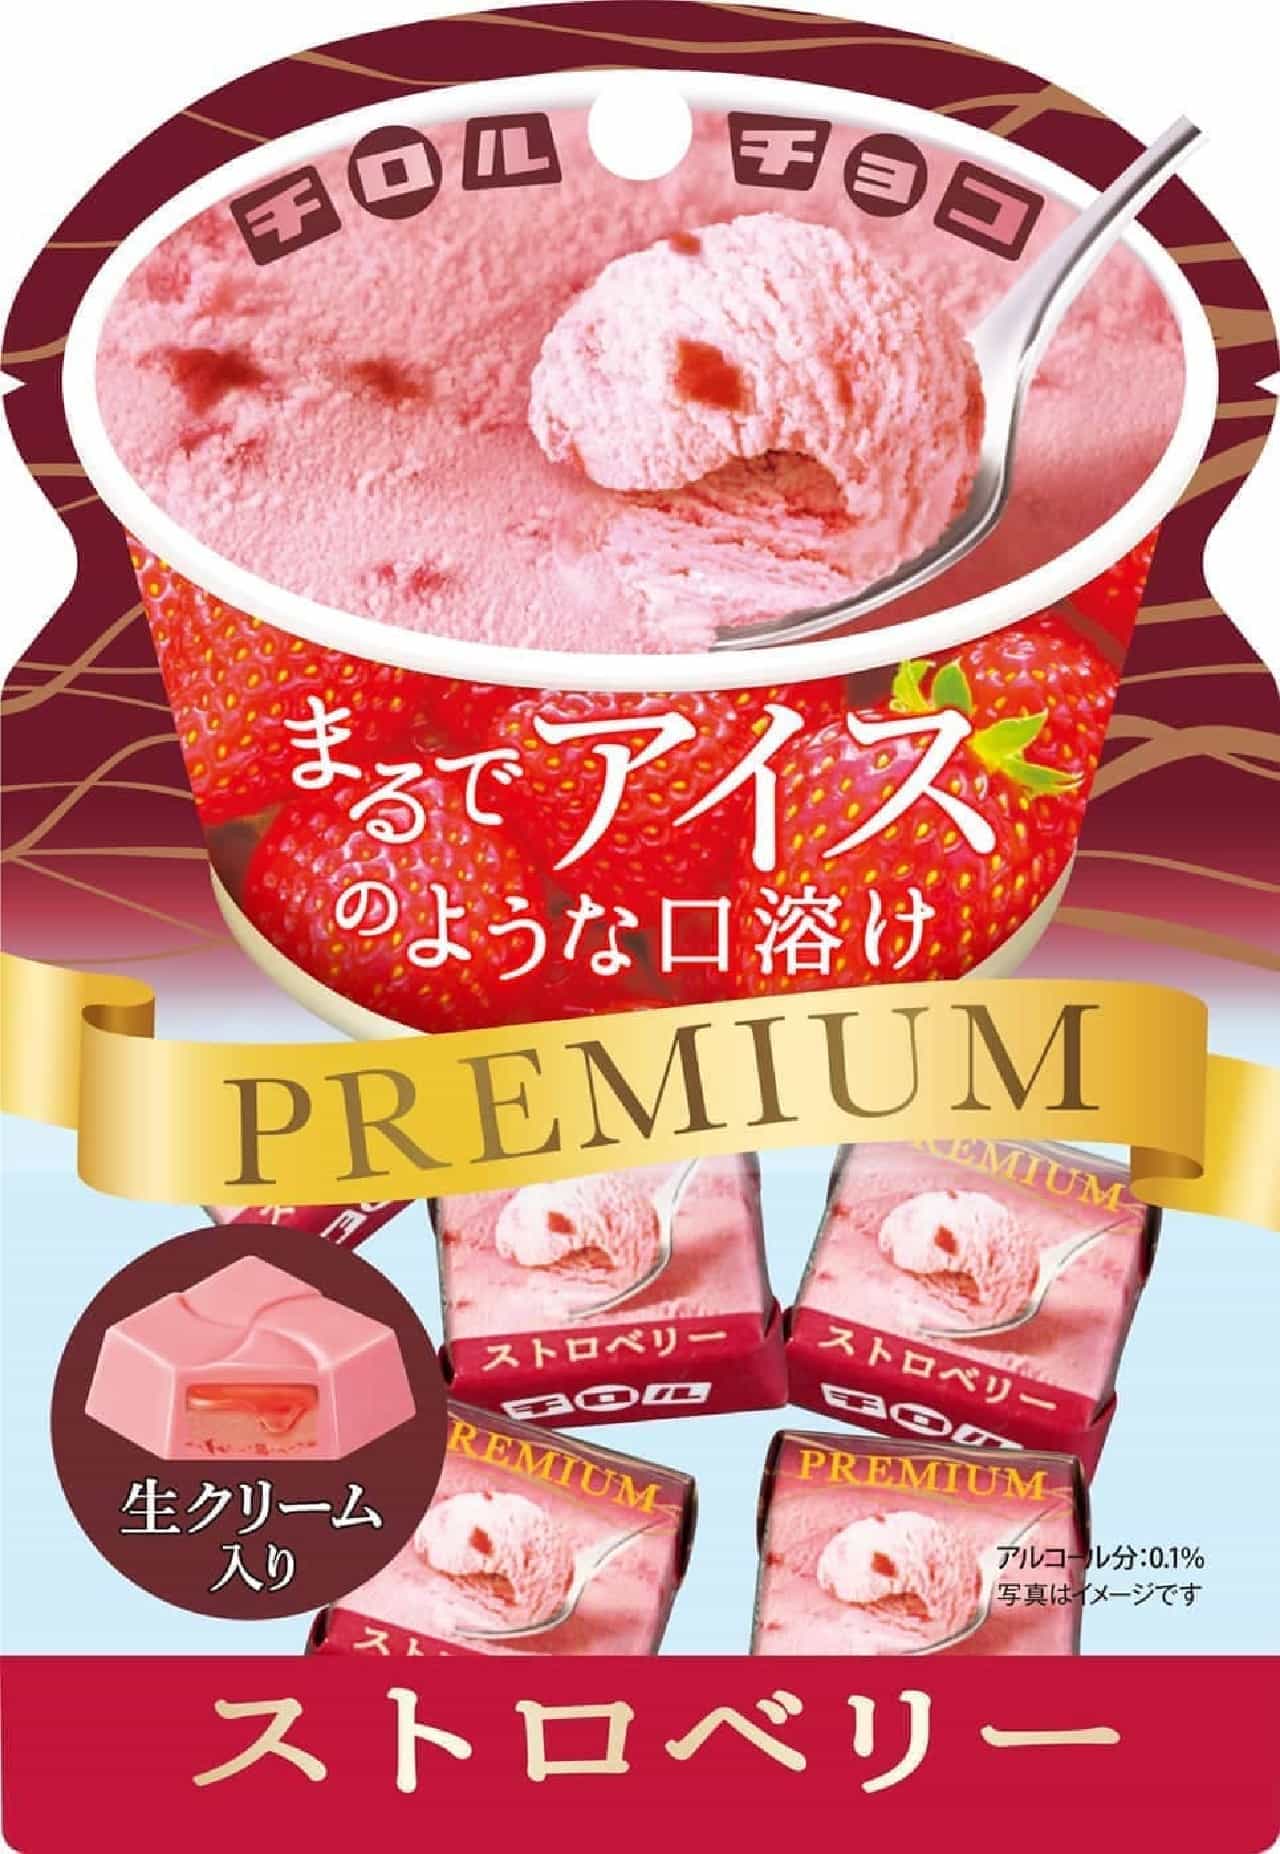 Tyrolean chocolate "Premium Strawberry Pouch"